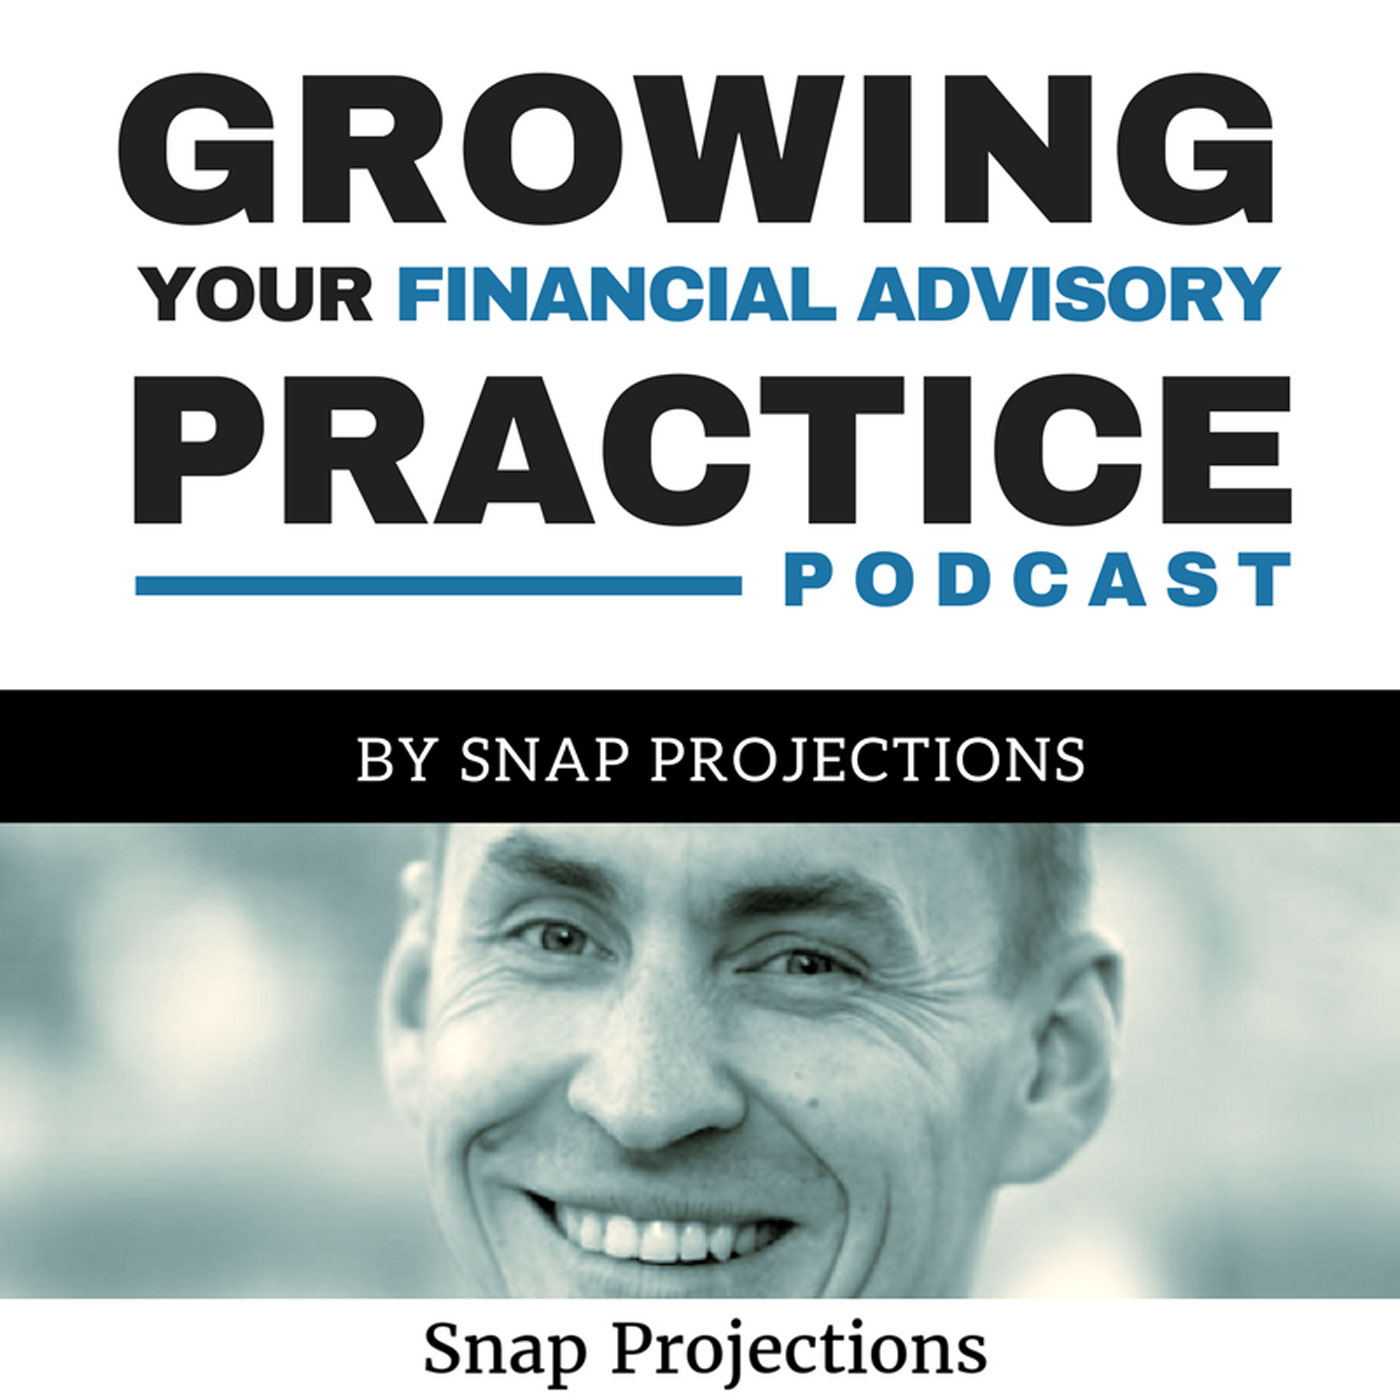 048: Transforming the Financial Planning Industry into an Evidence-based, Fiduciary Profession